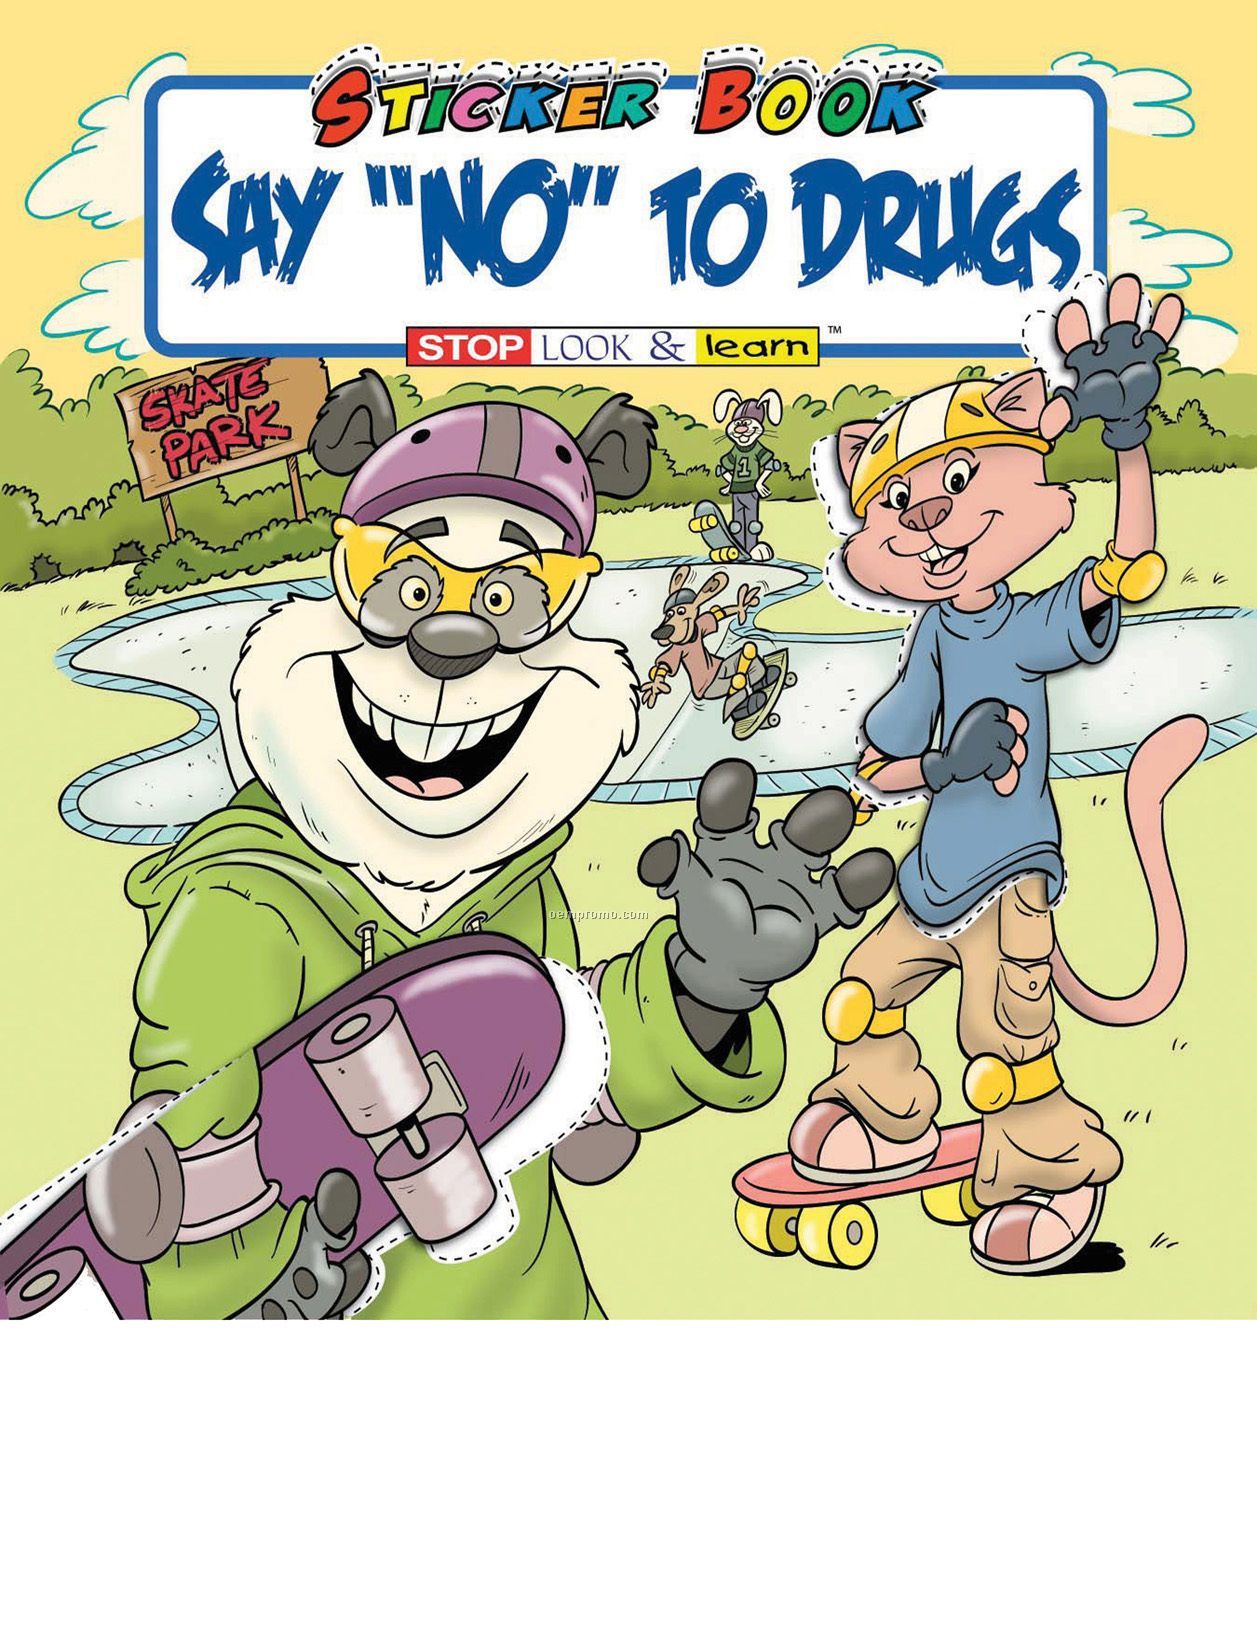 Say "No" To Drugs Sticker Book Fun Pack